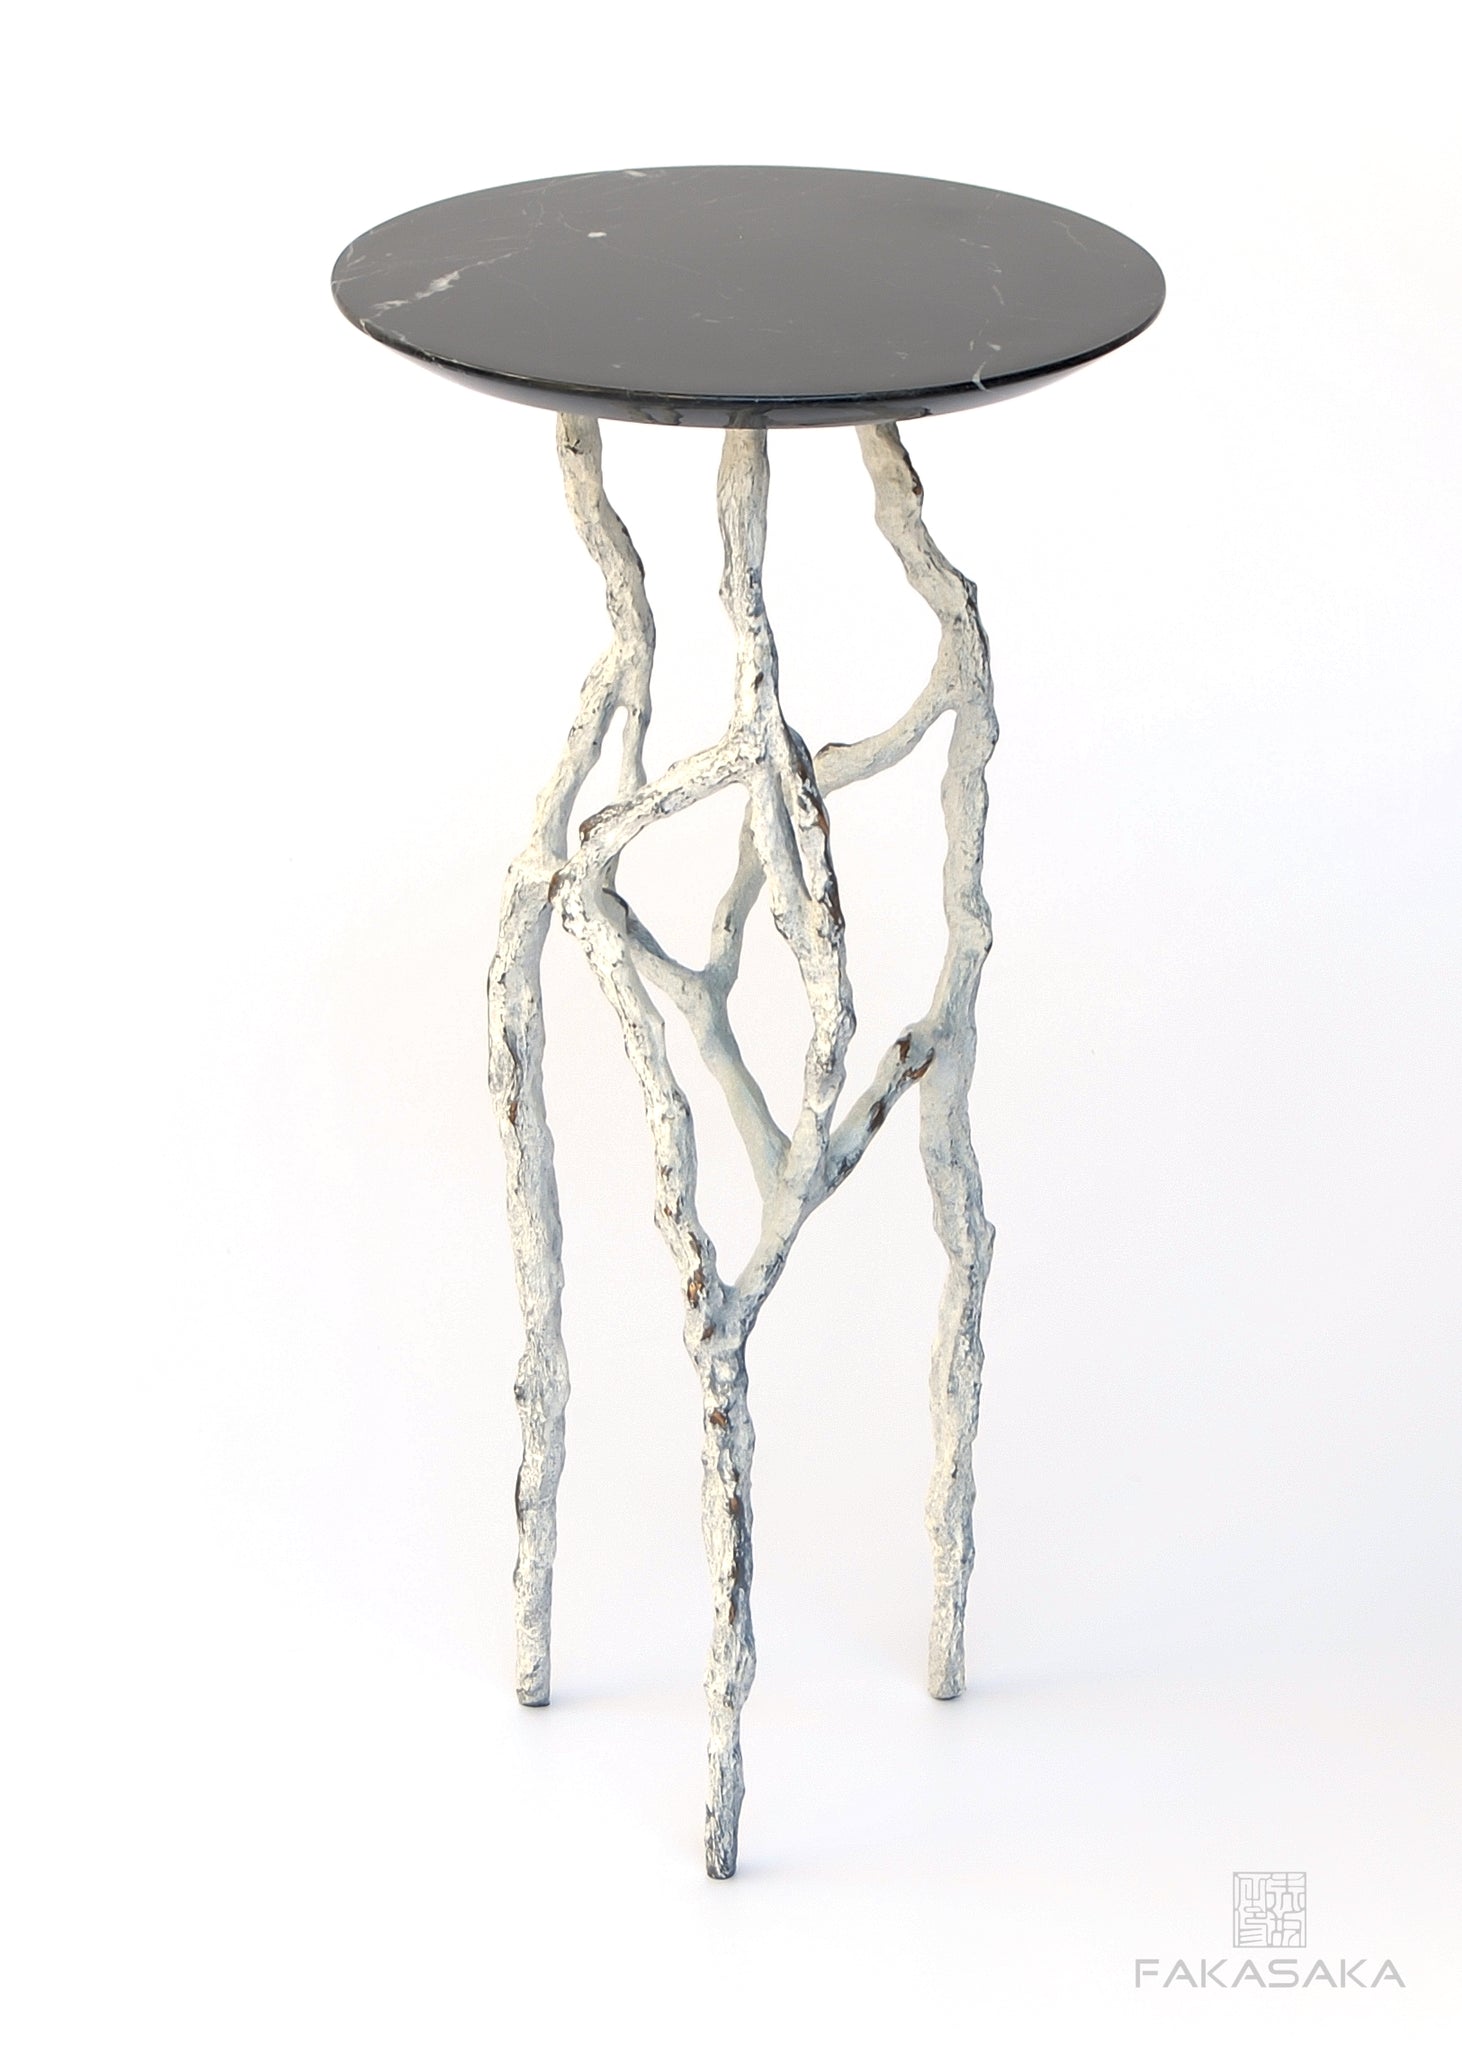 ALEXIA 3 DRINK TABLE<br><br>NERO MARQUINA MARBLE<br>OFF-WHITE BRONZE